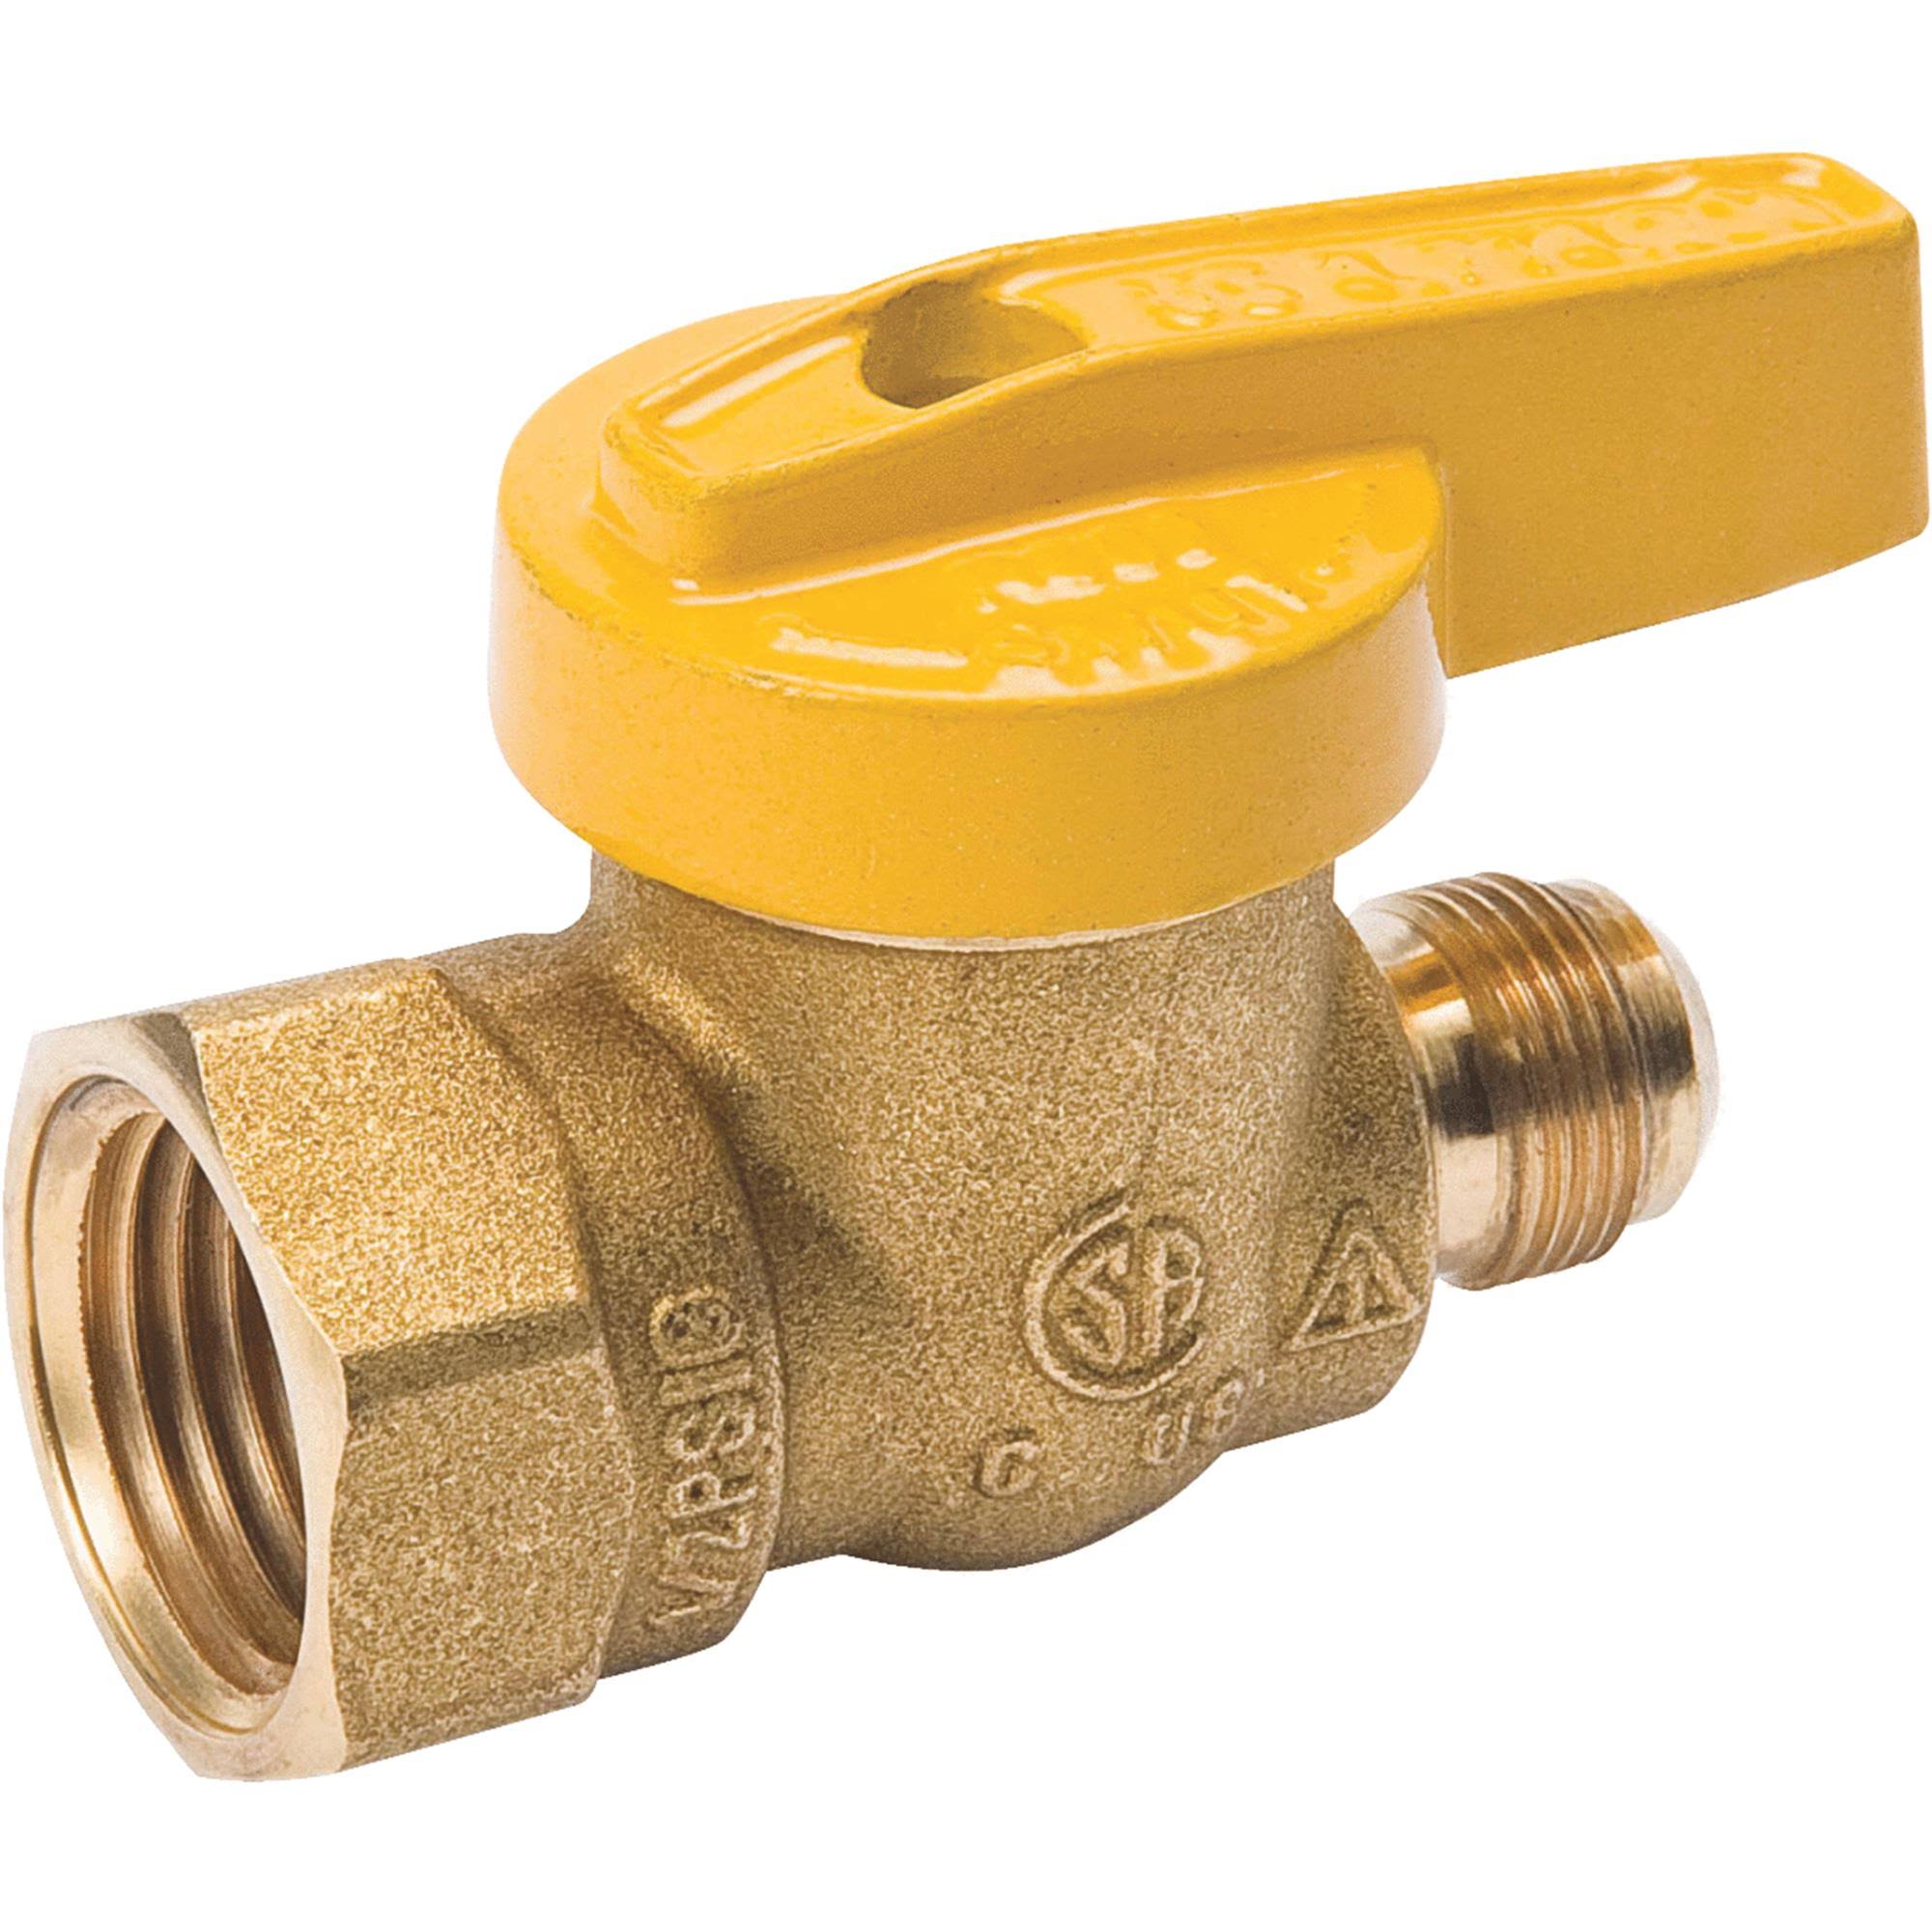 B and K Industries 117-592 Gas Heater Valve - 3/8" x 1/2"